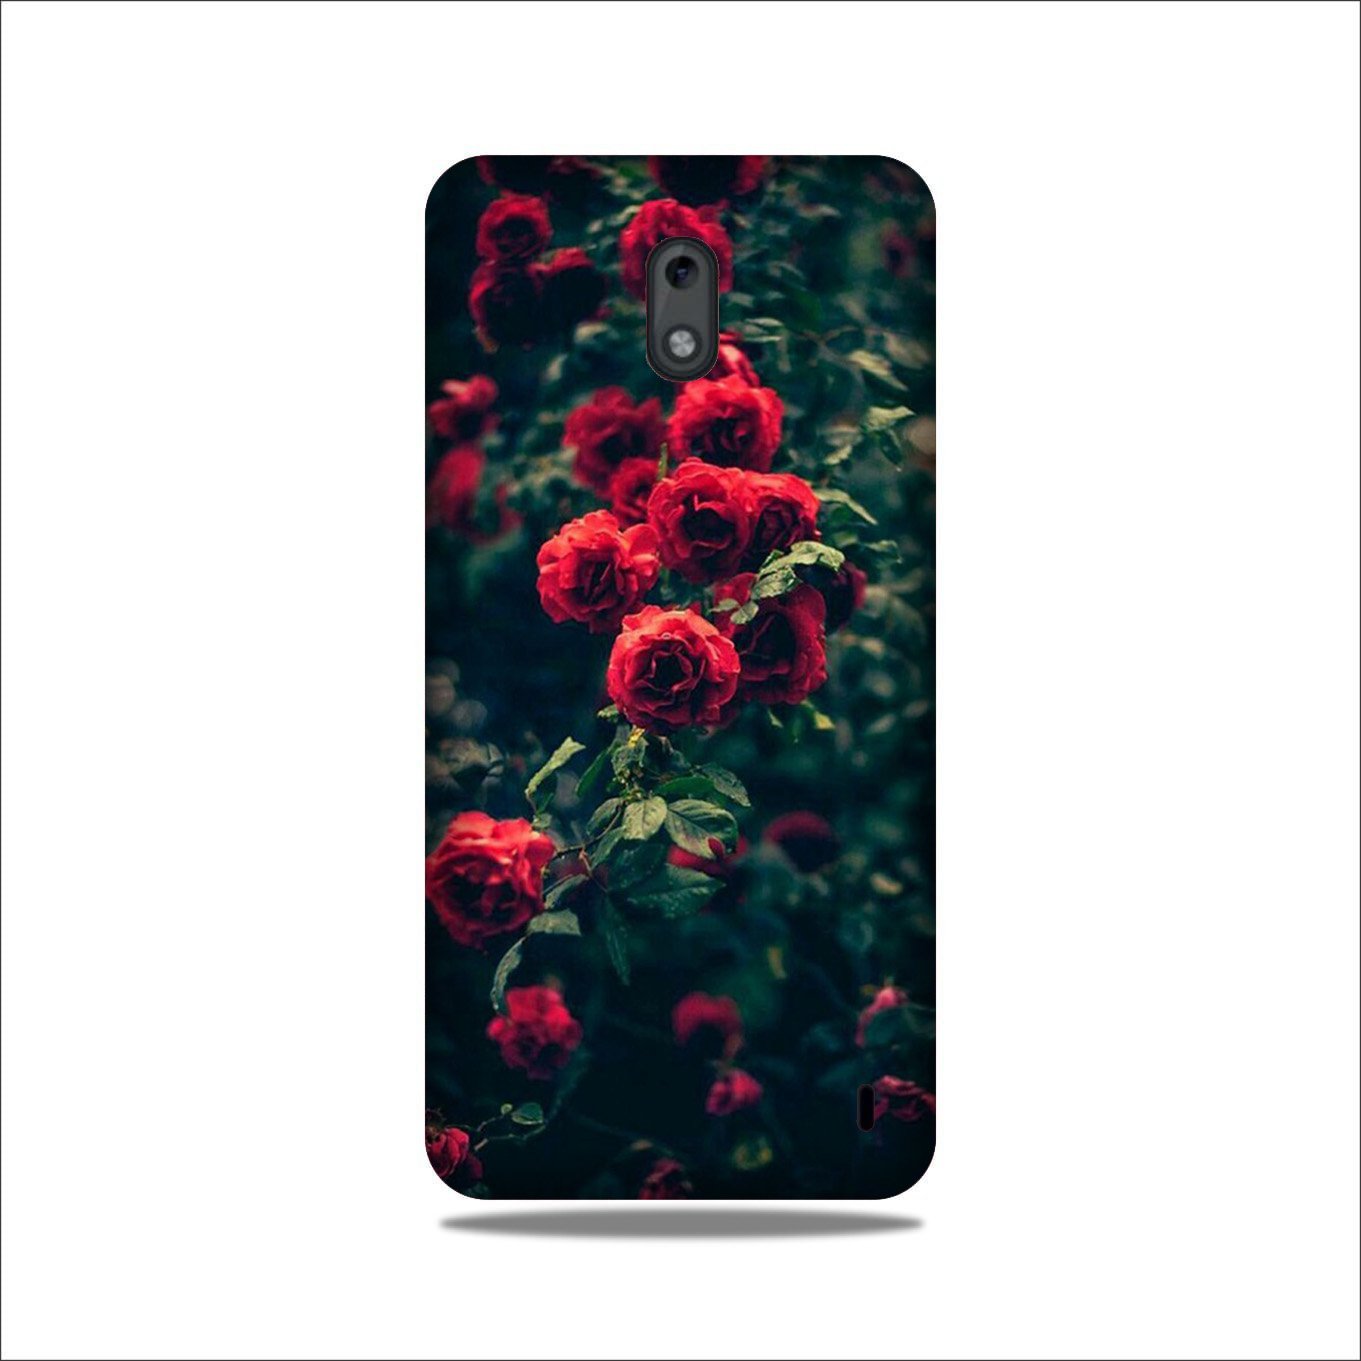 Red Rose Case for Nokia 3